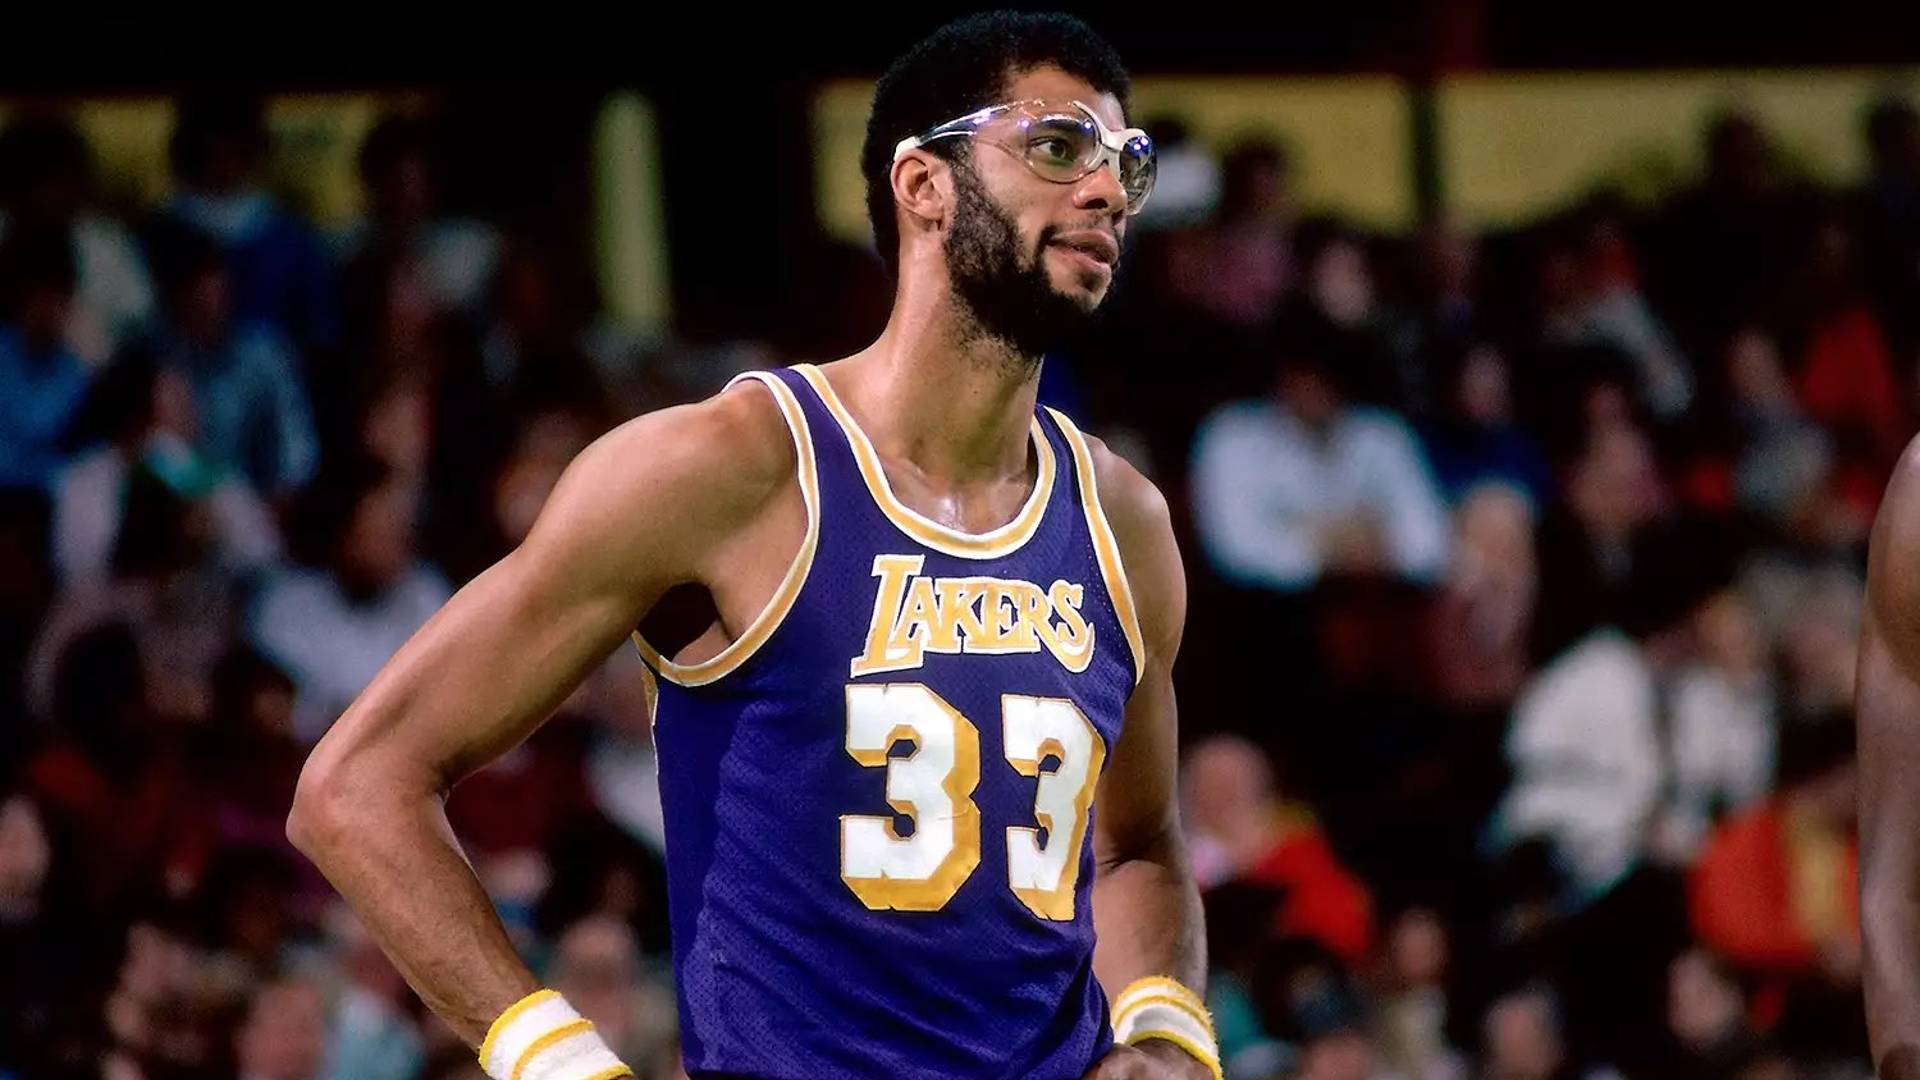 Kareem Abdul-Jabbar has the most points in the NBA. (Image credits: twitter)